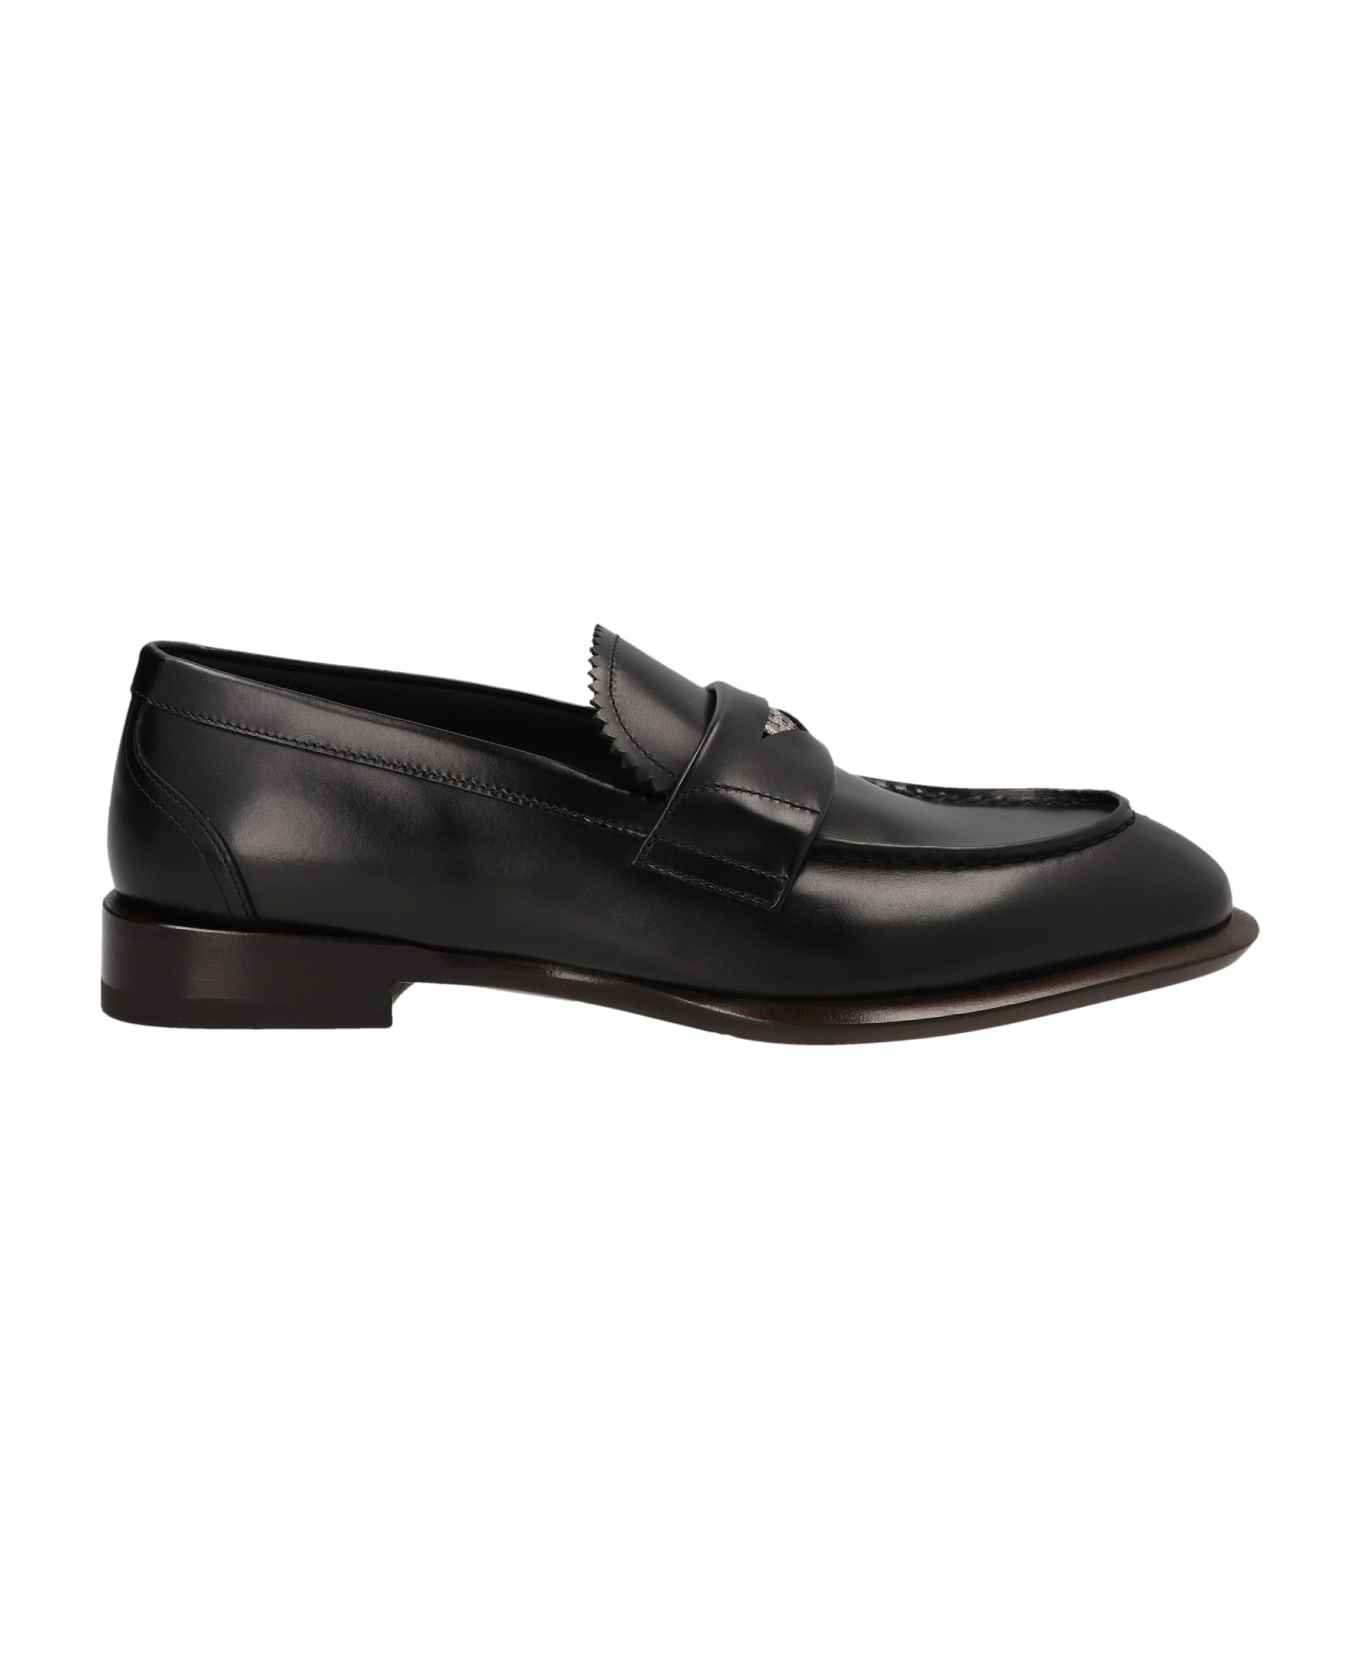 Alexander McQueen Leather Loafers - Black ローファー＆デッキシューズ